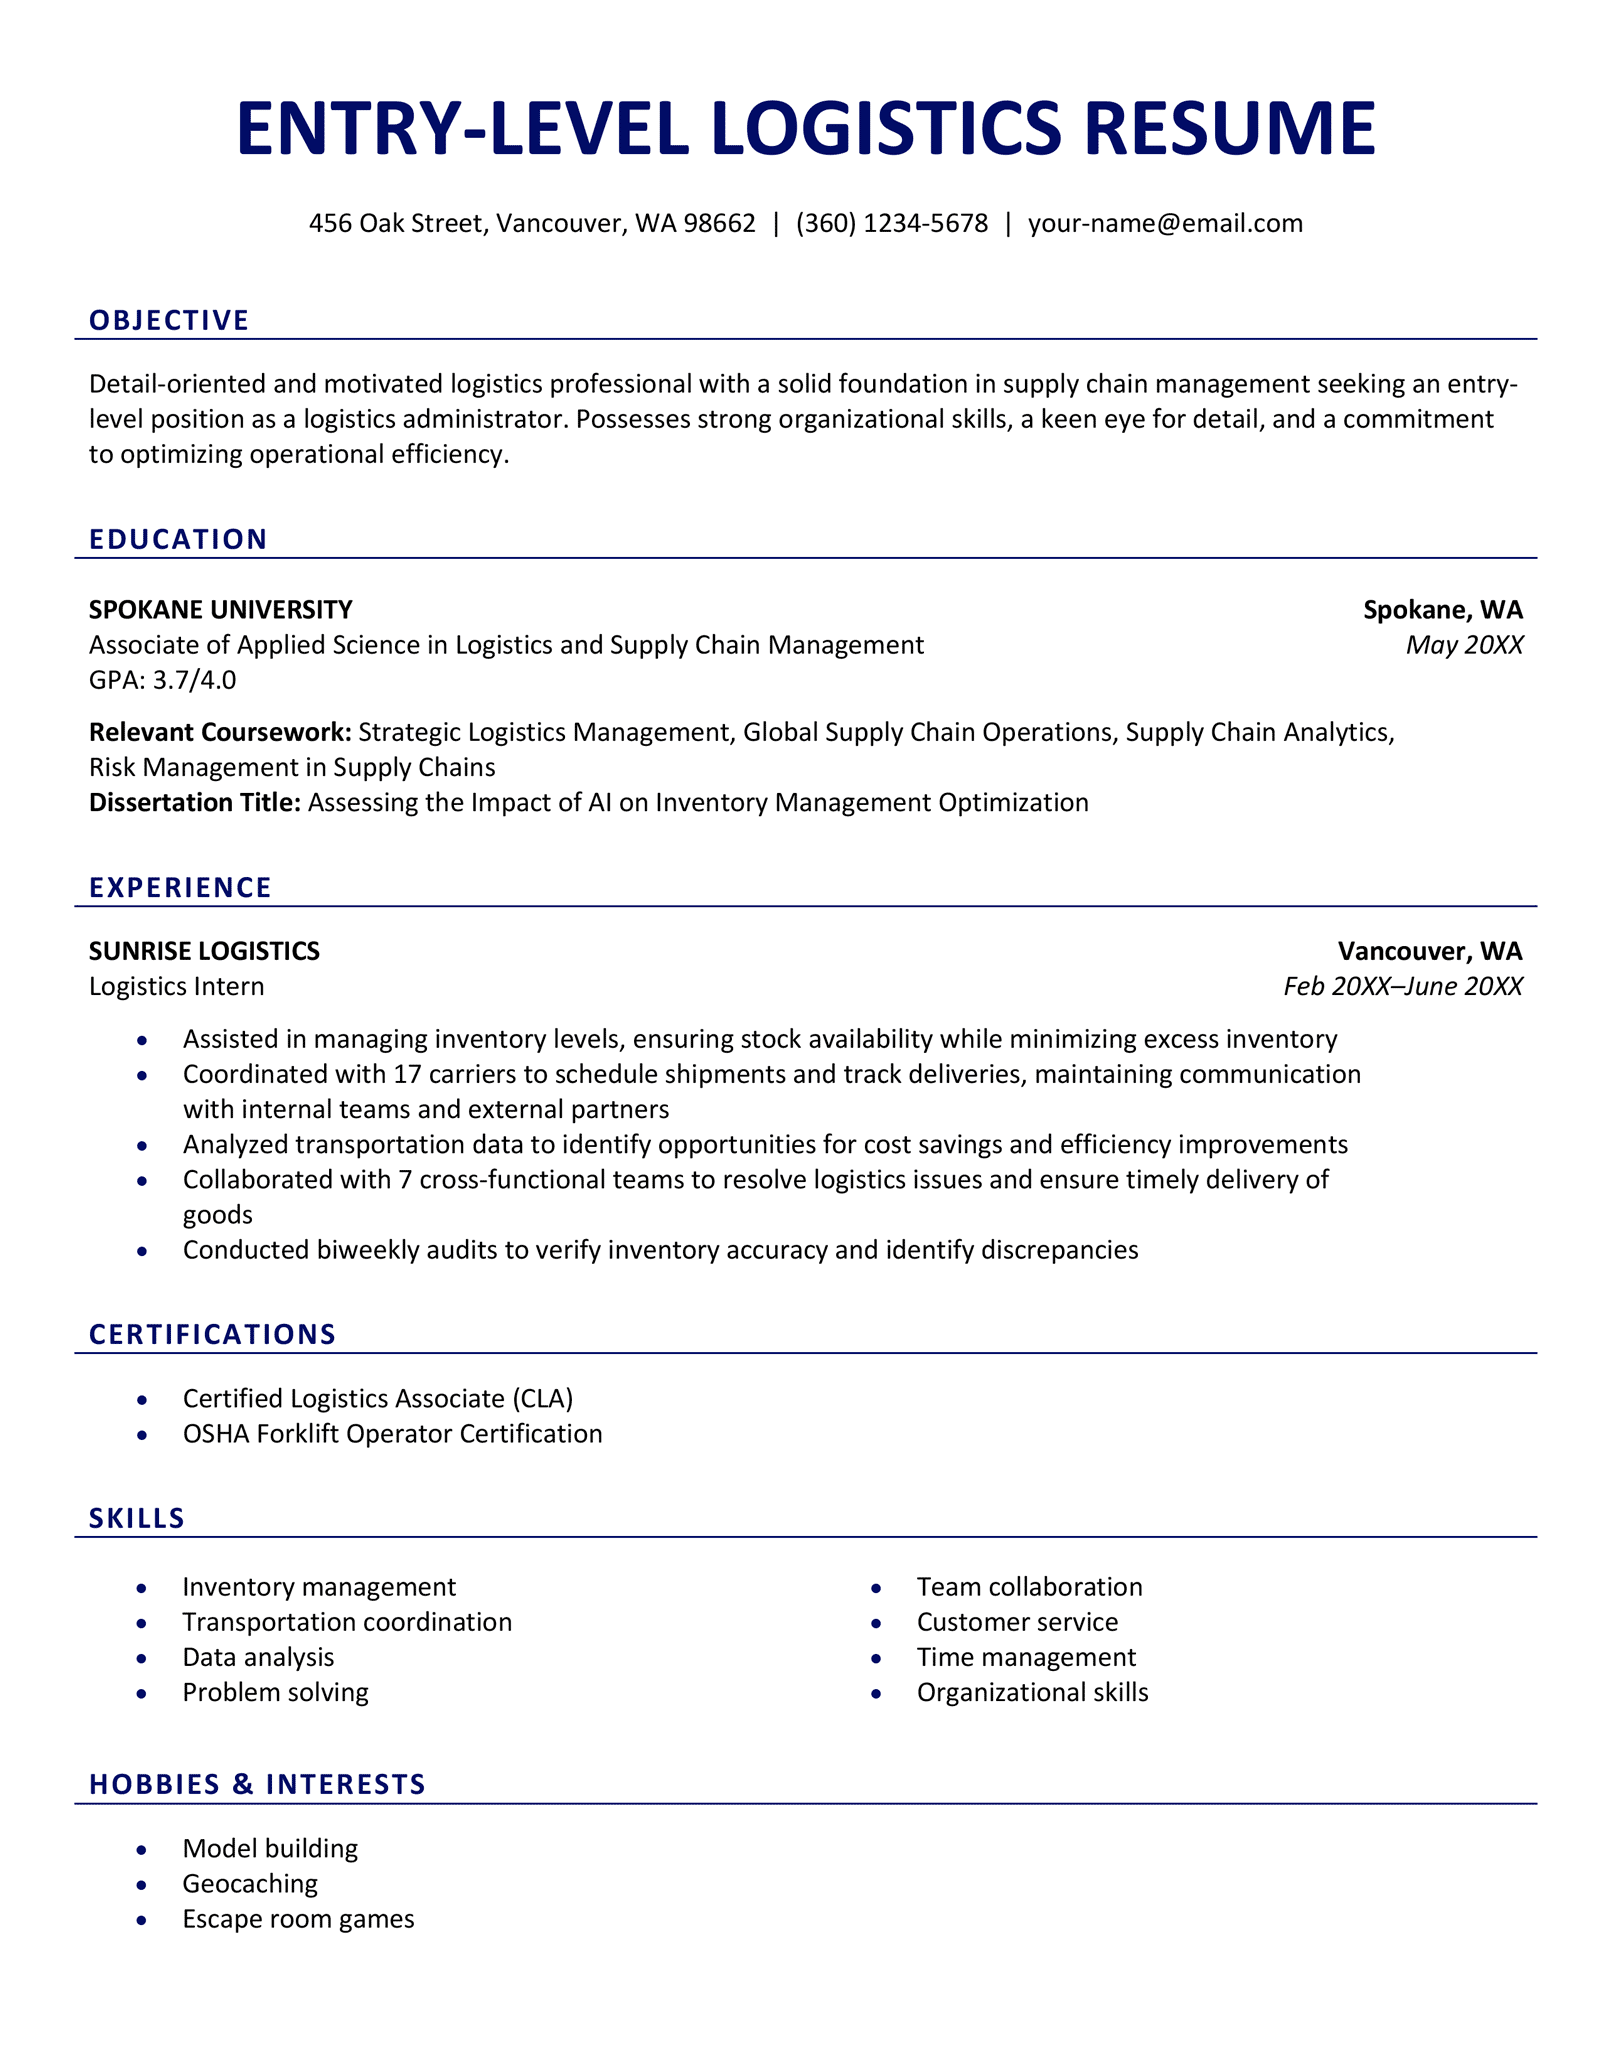 An entry-level logistics resume with a prominent education section.